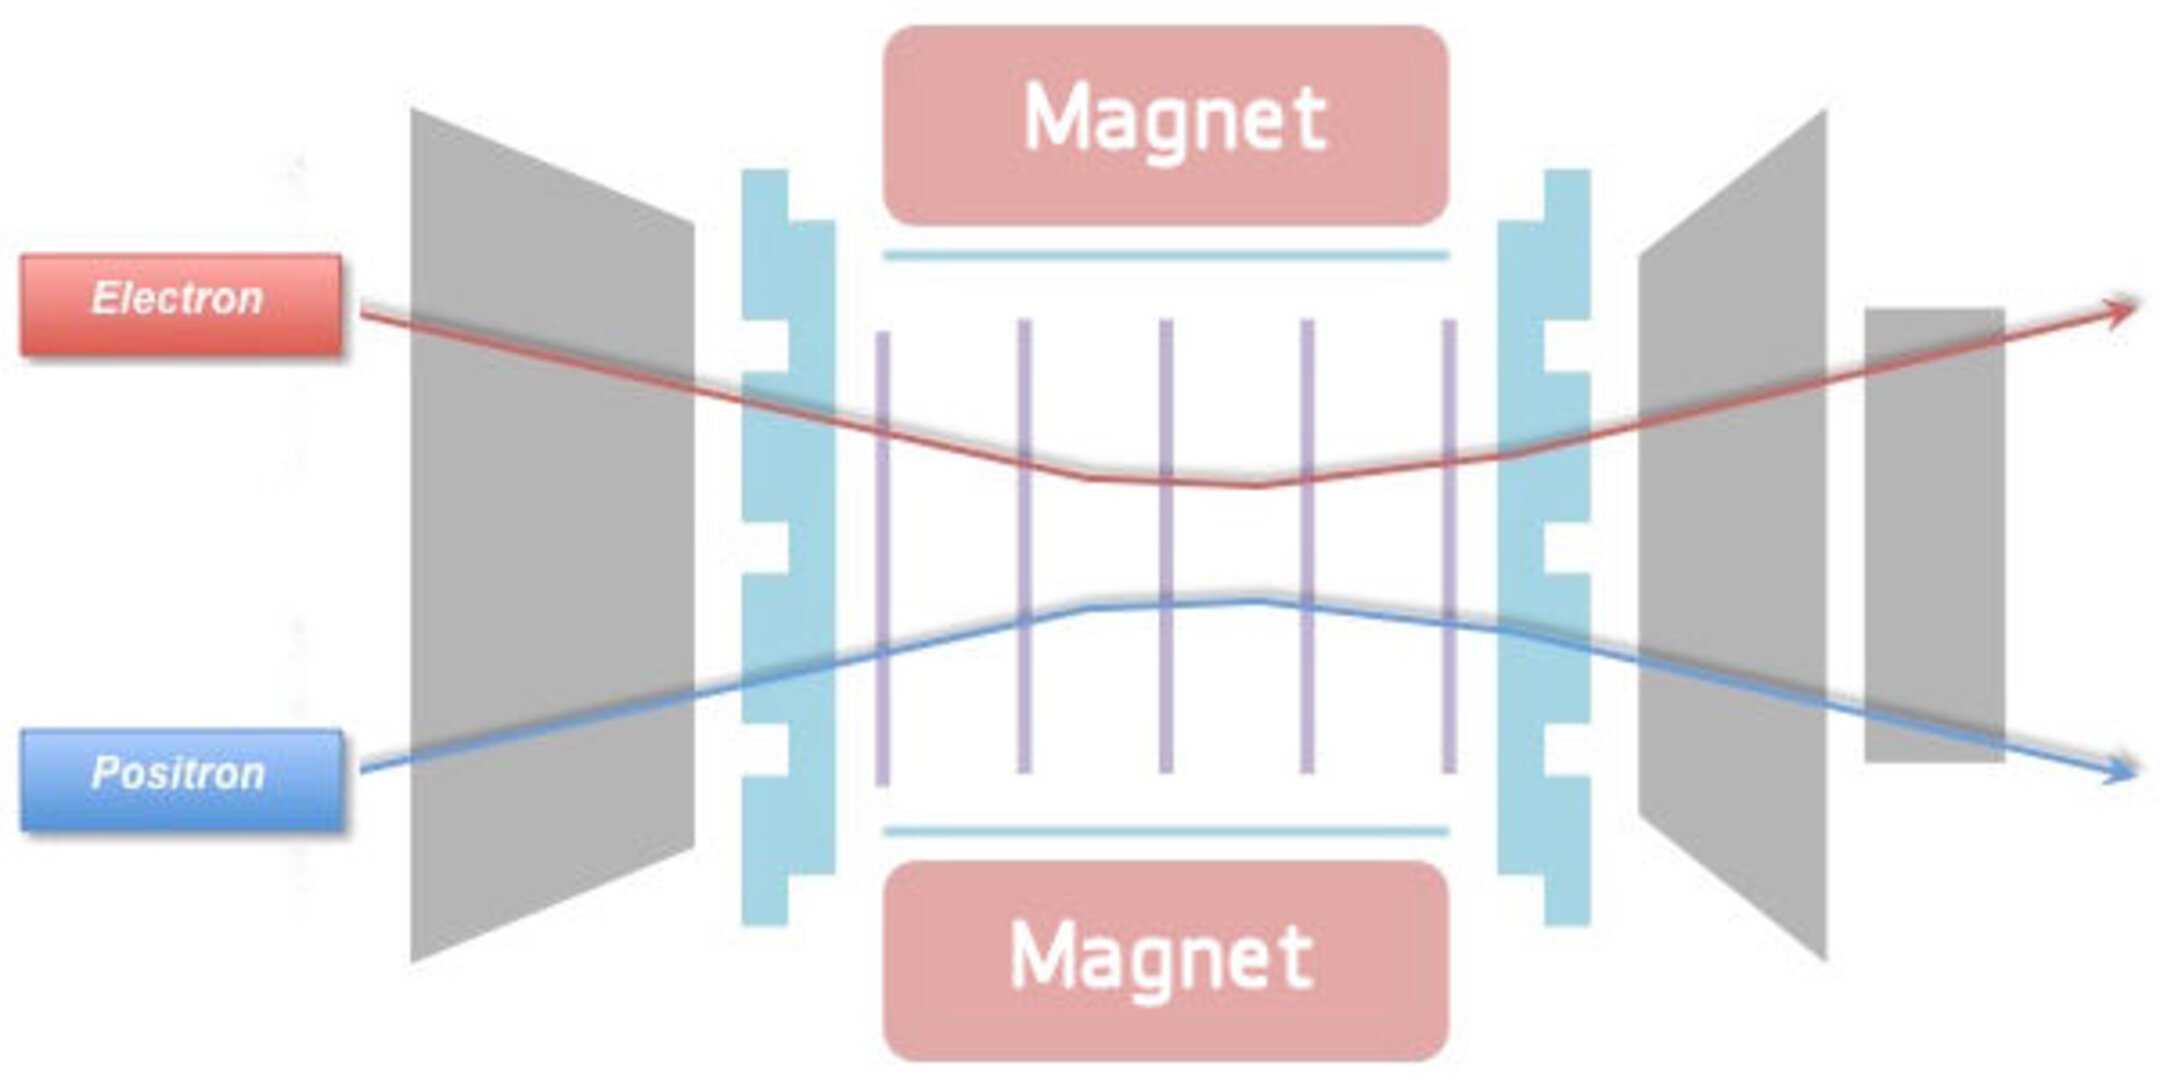 Magnets bend charged particles and anti-particles in opposite directions